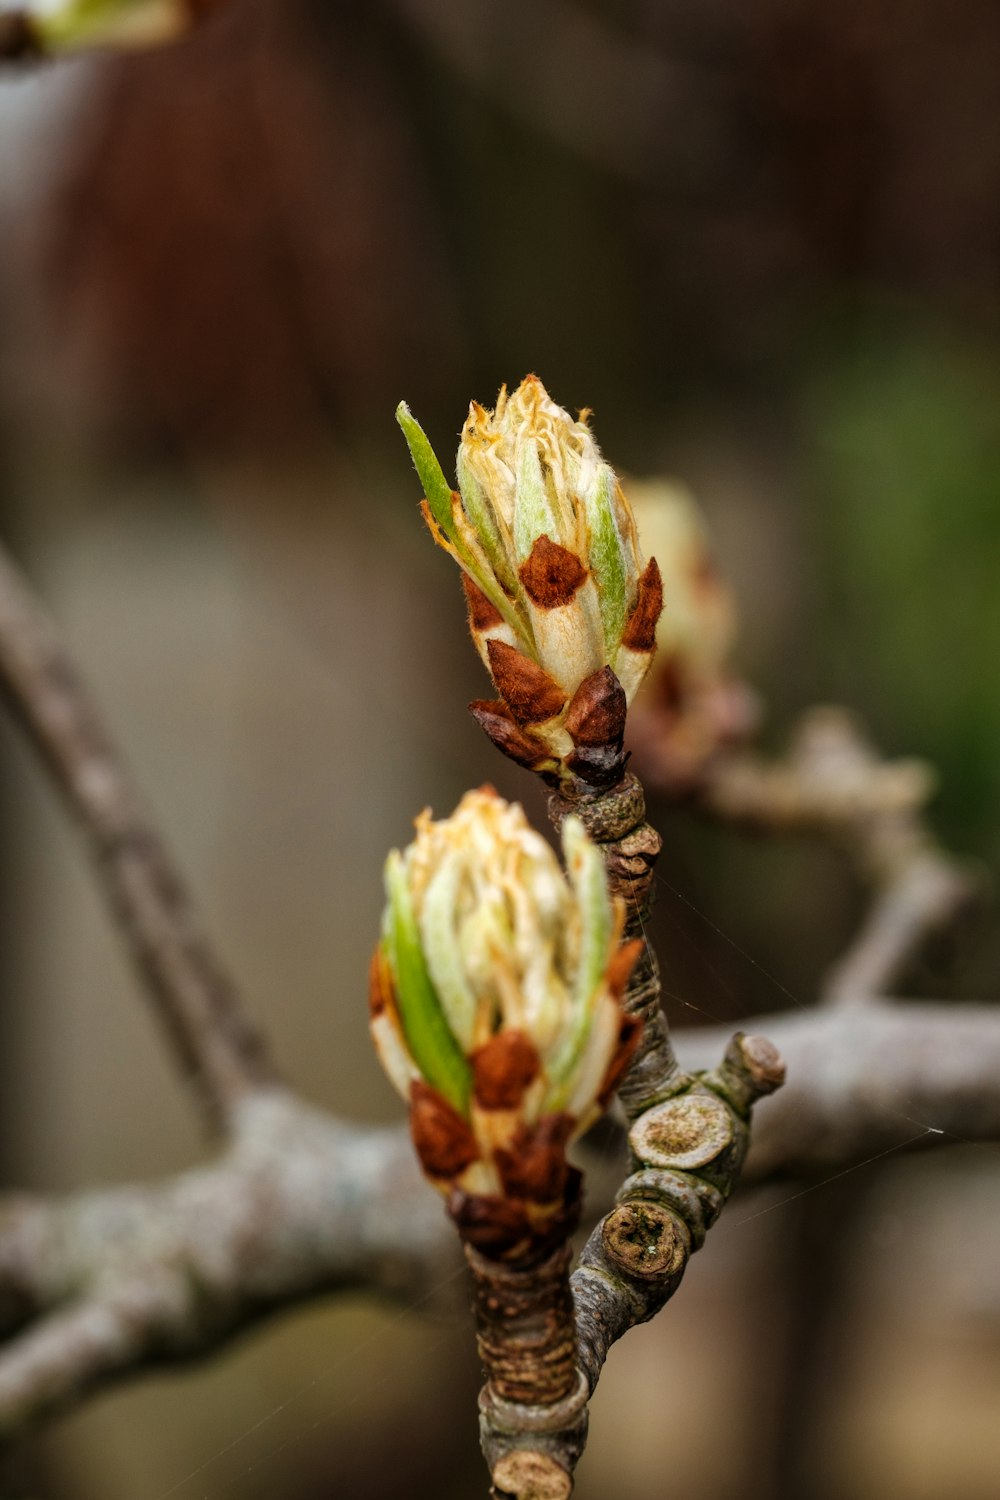 the buds of a tree are starting to open